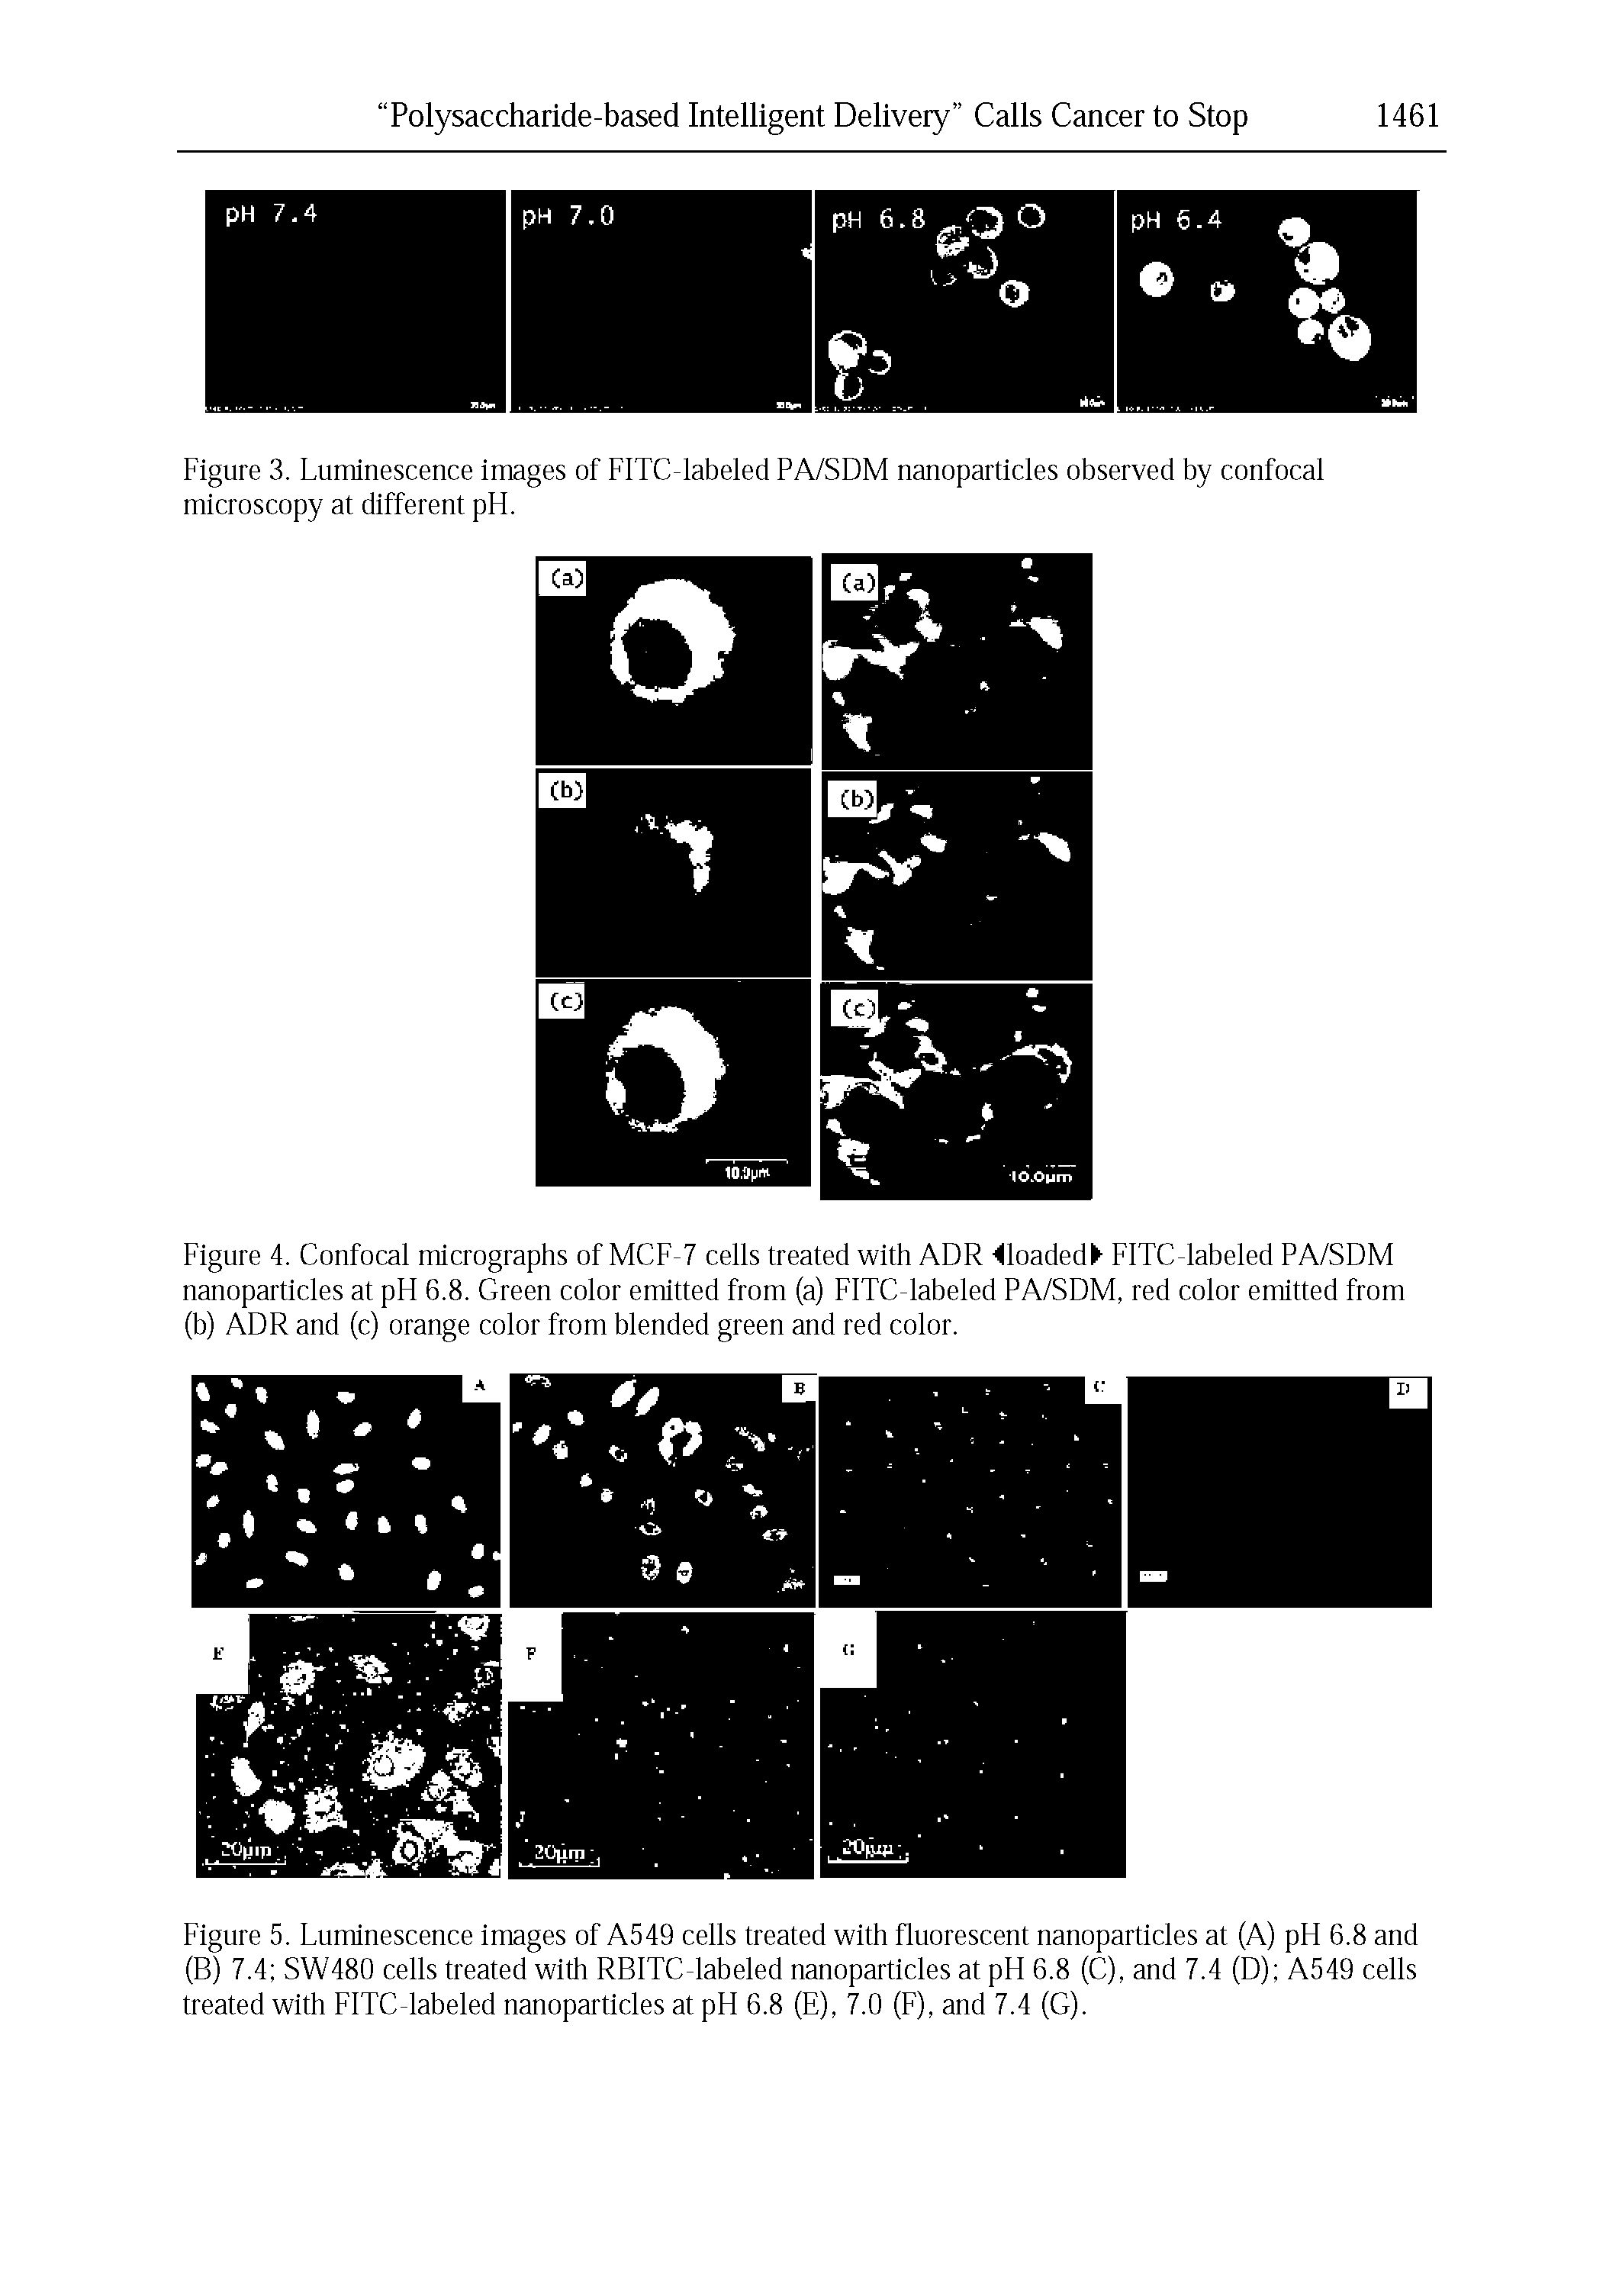 Figure 3. Luminescence Images of FITC-labeled PA/SDM nanoparticles observed by confocal microscopy at different pff.